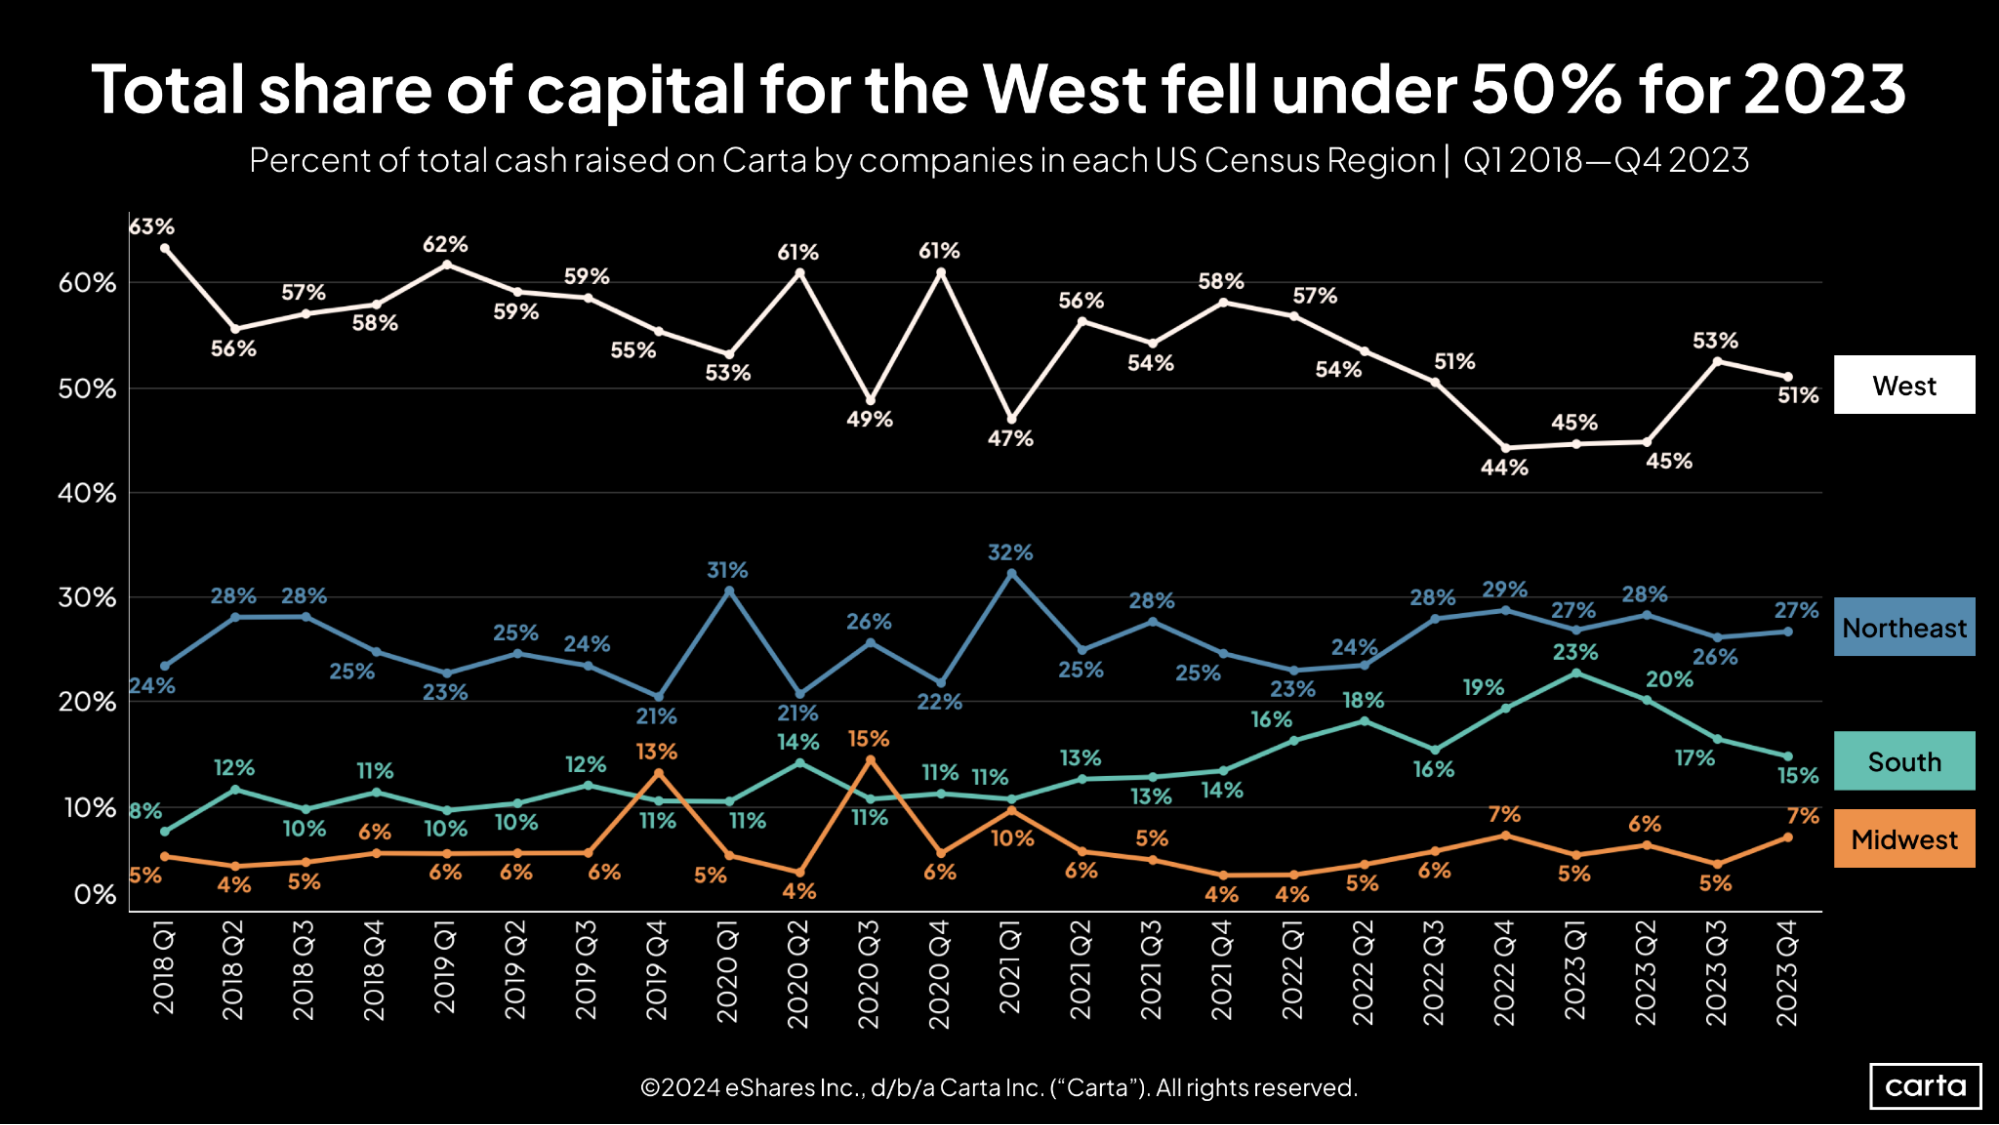 Carta SOPM Q4 2023 Total share of capital for the West fell under 50 percent for 2023